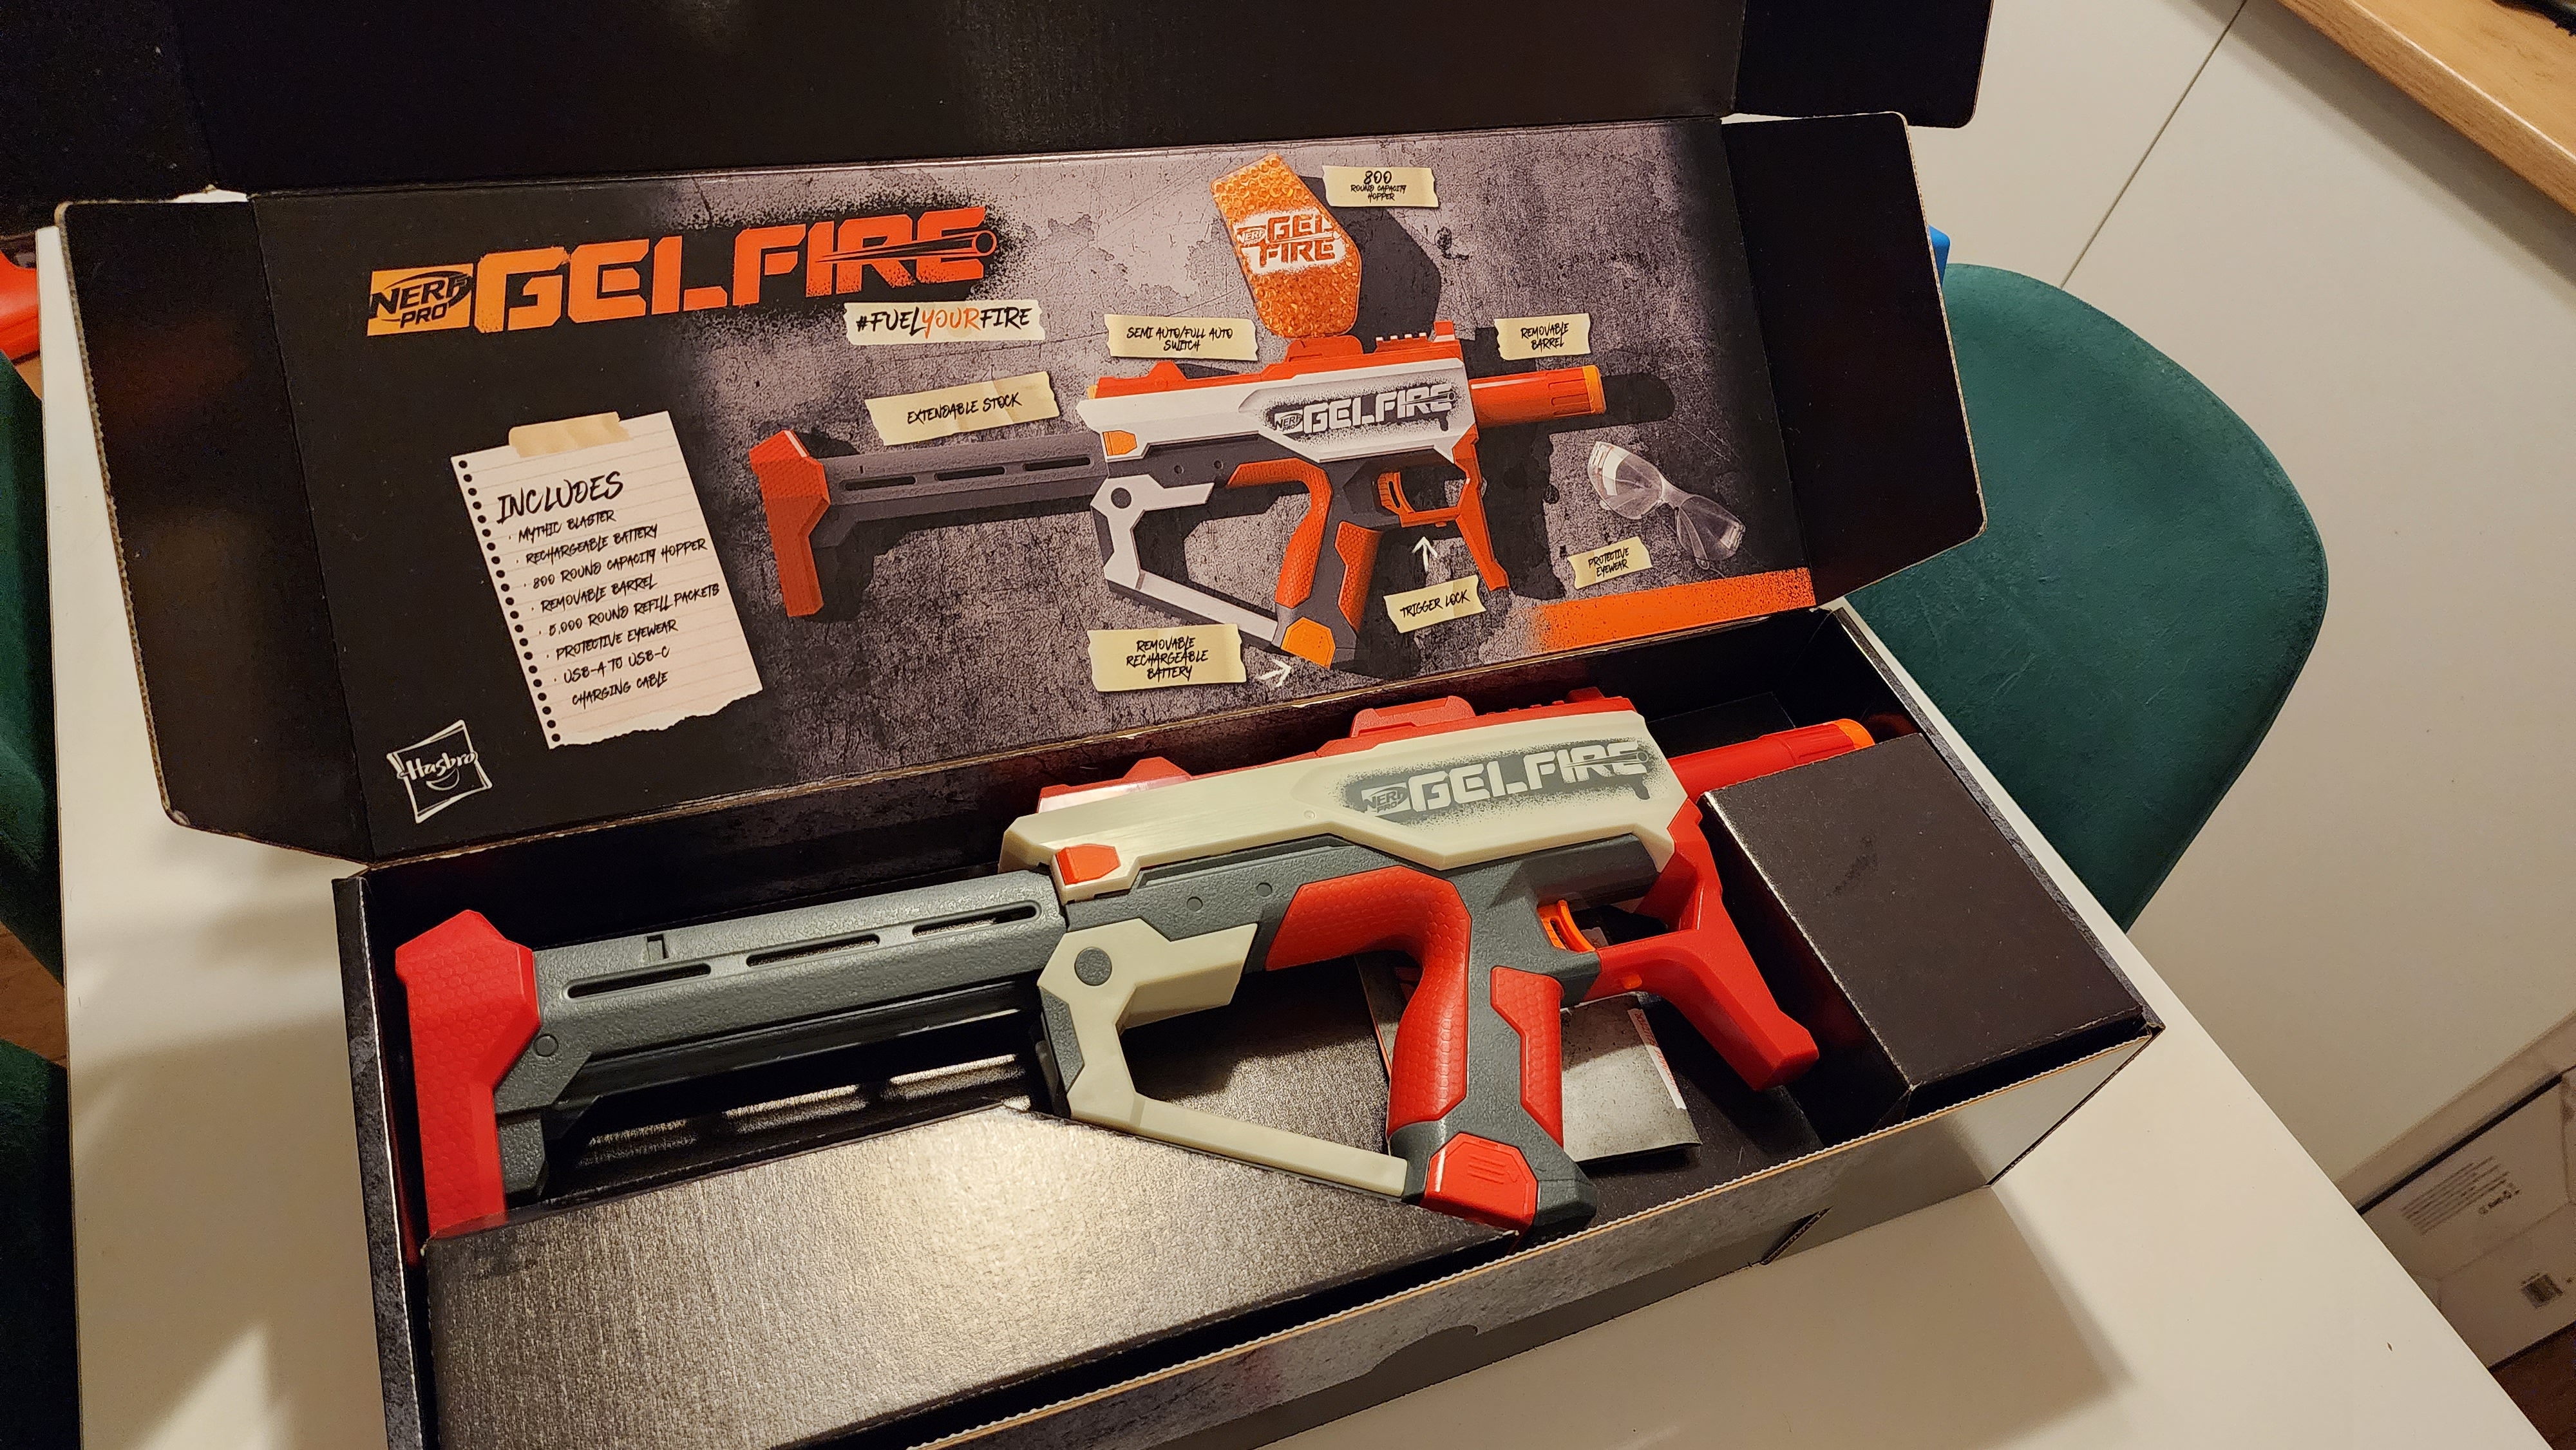 Nerf Pro Gelfire Mythic Gel Blaster Review: Is It Worth the Hype?